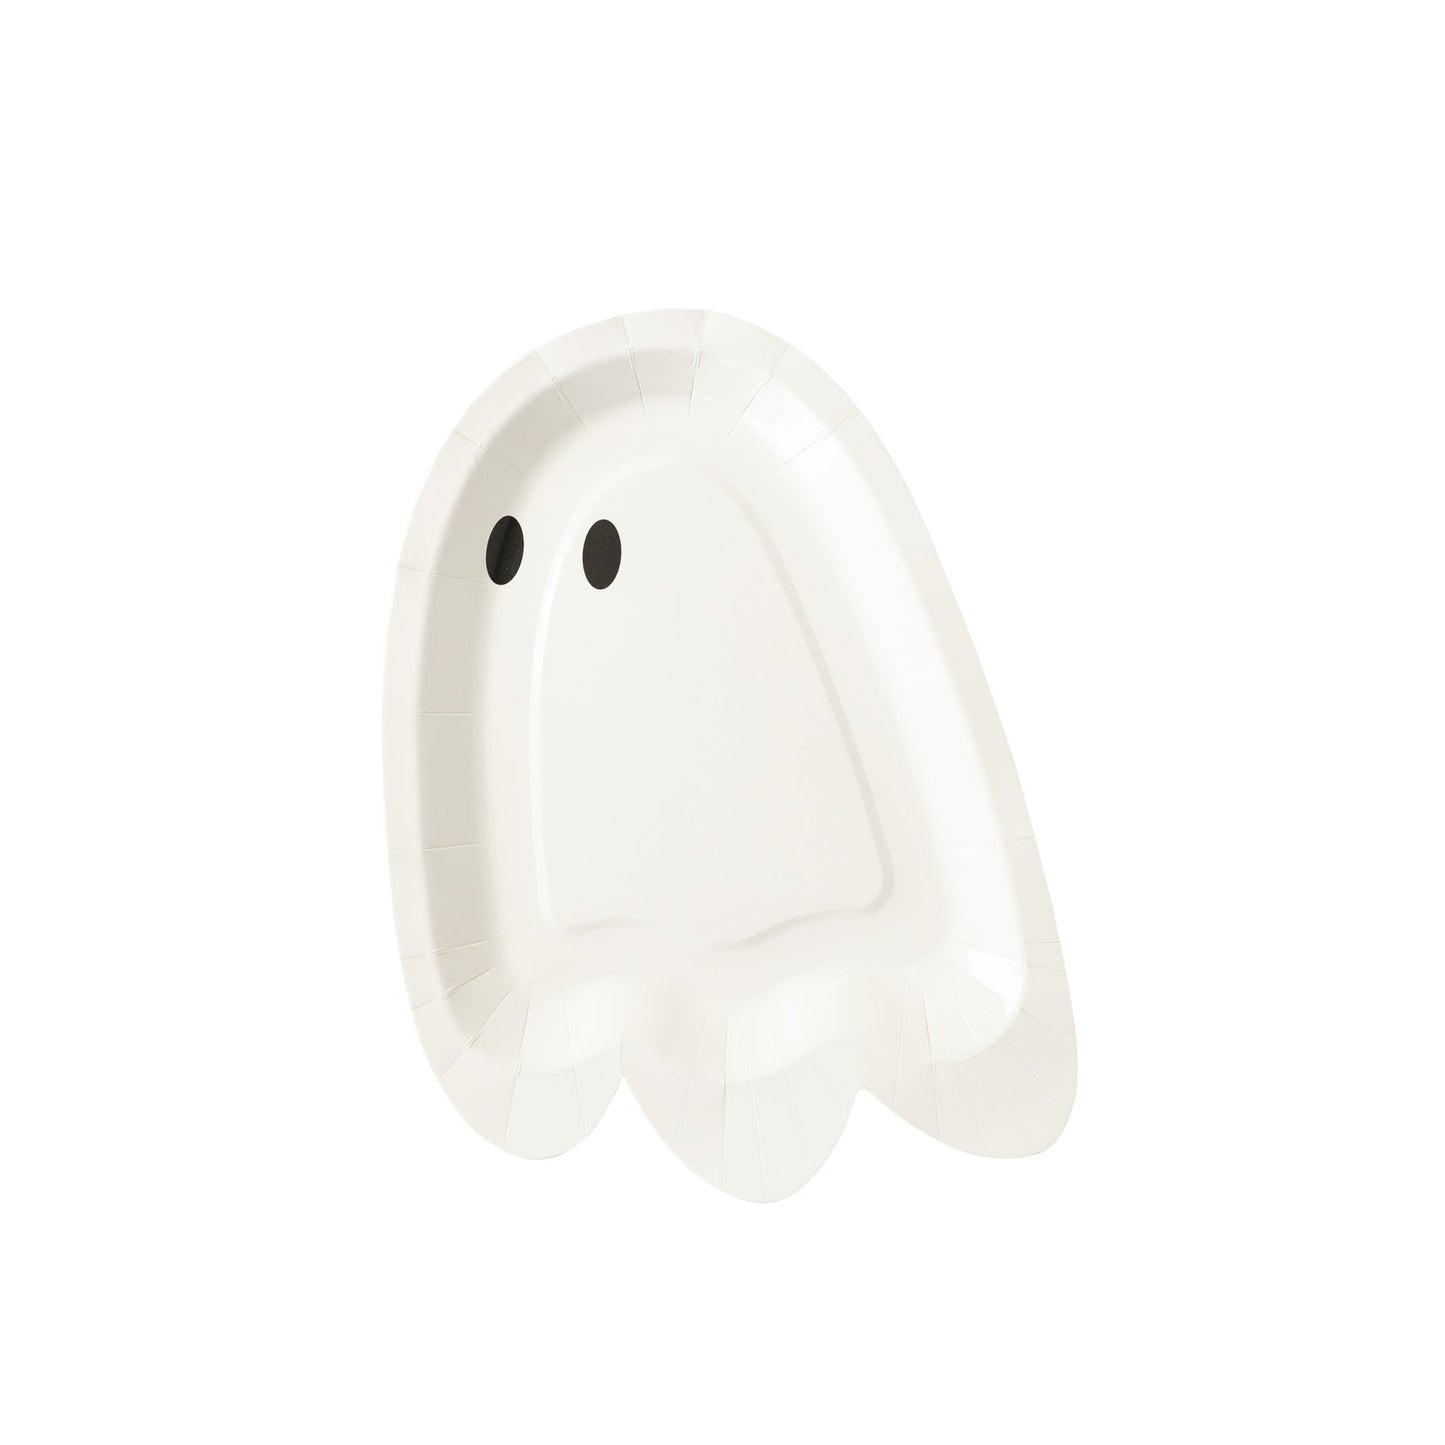 Ghost Shaped Paper Plates